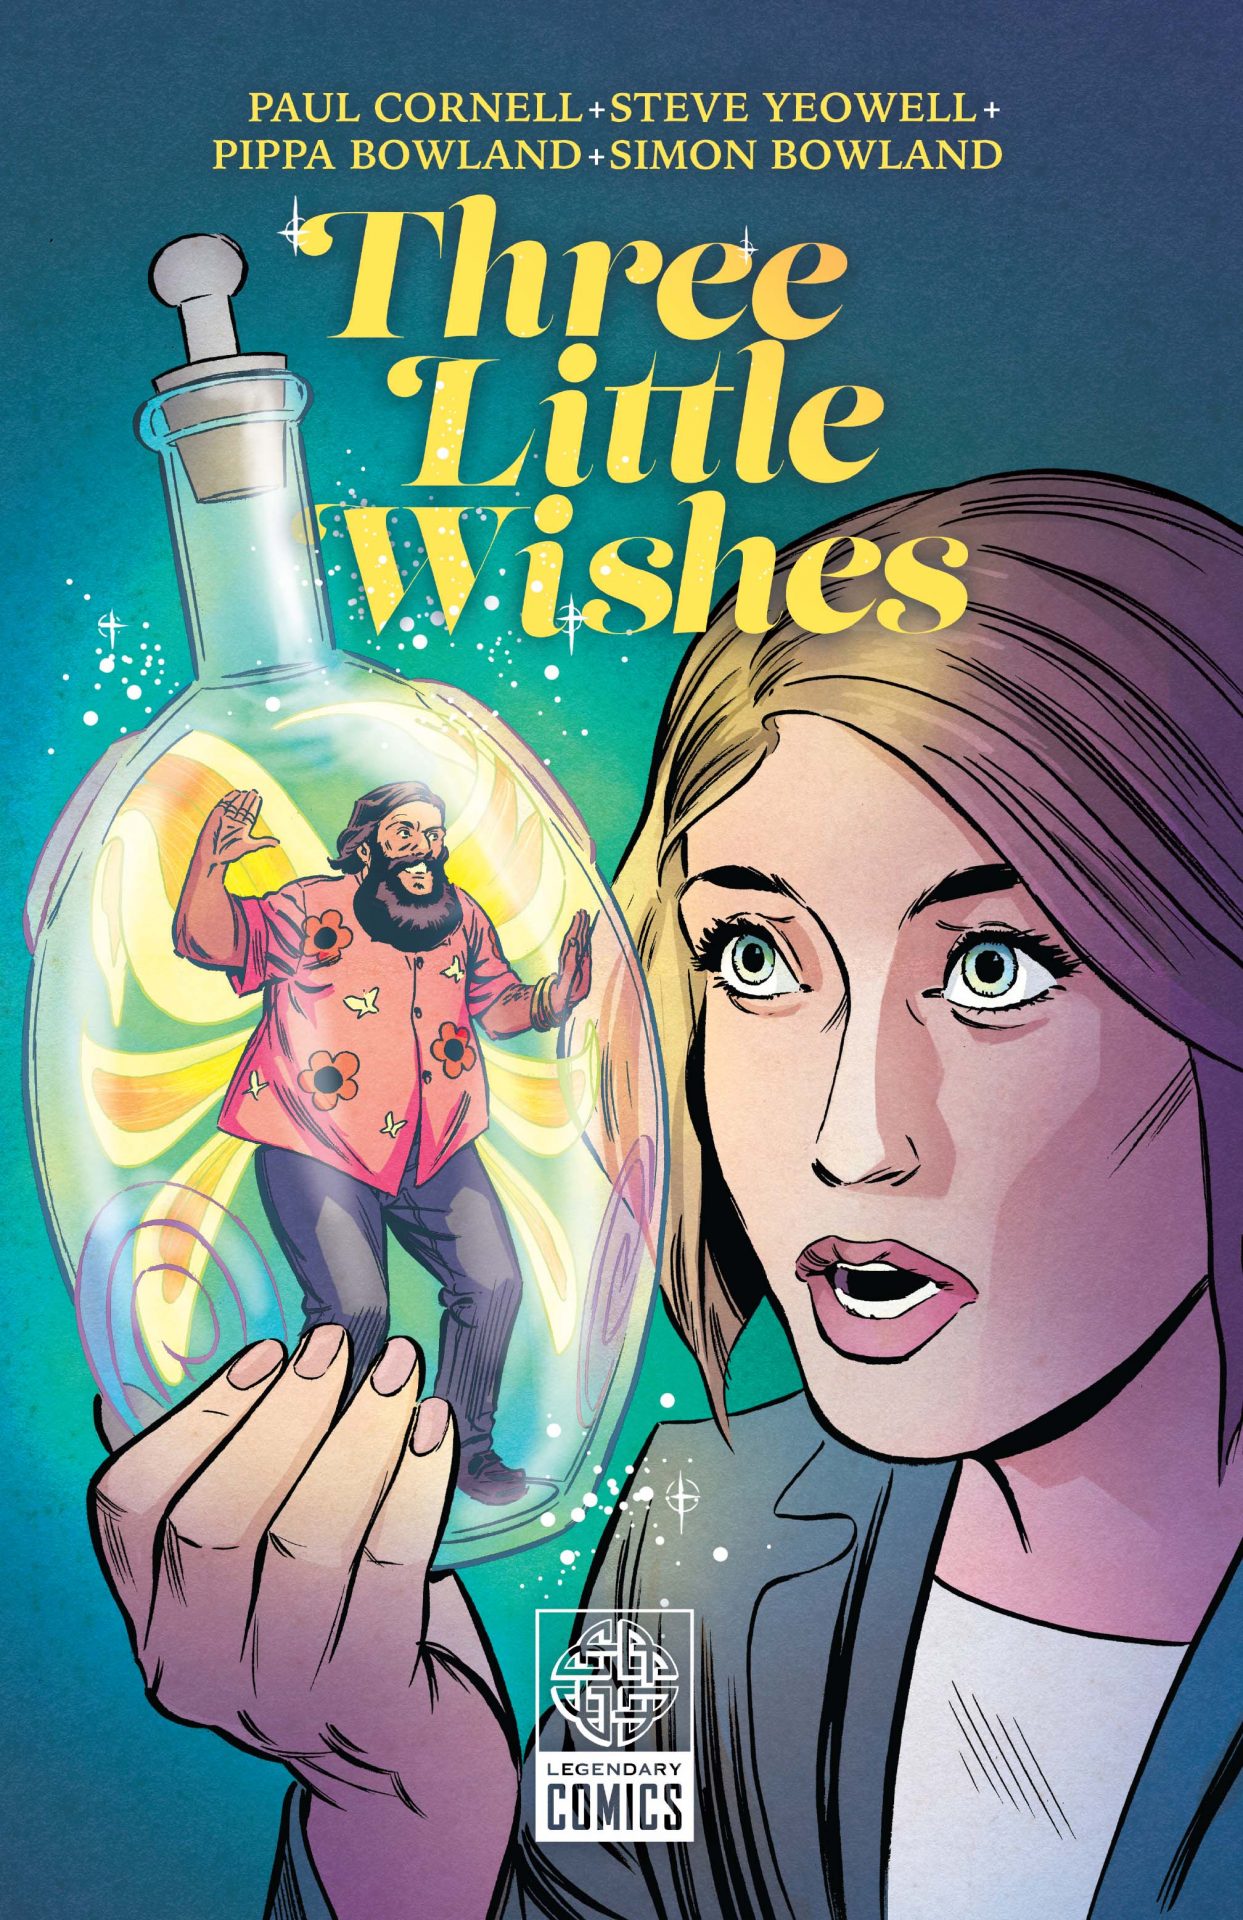 Legendary Comics' Three Little Wishes cover